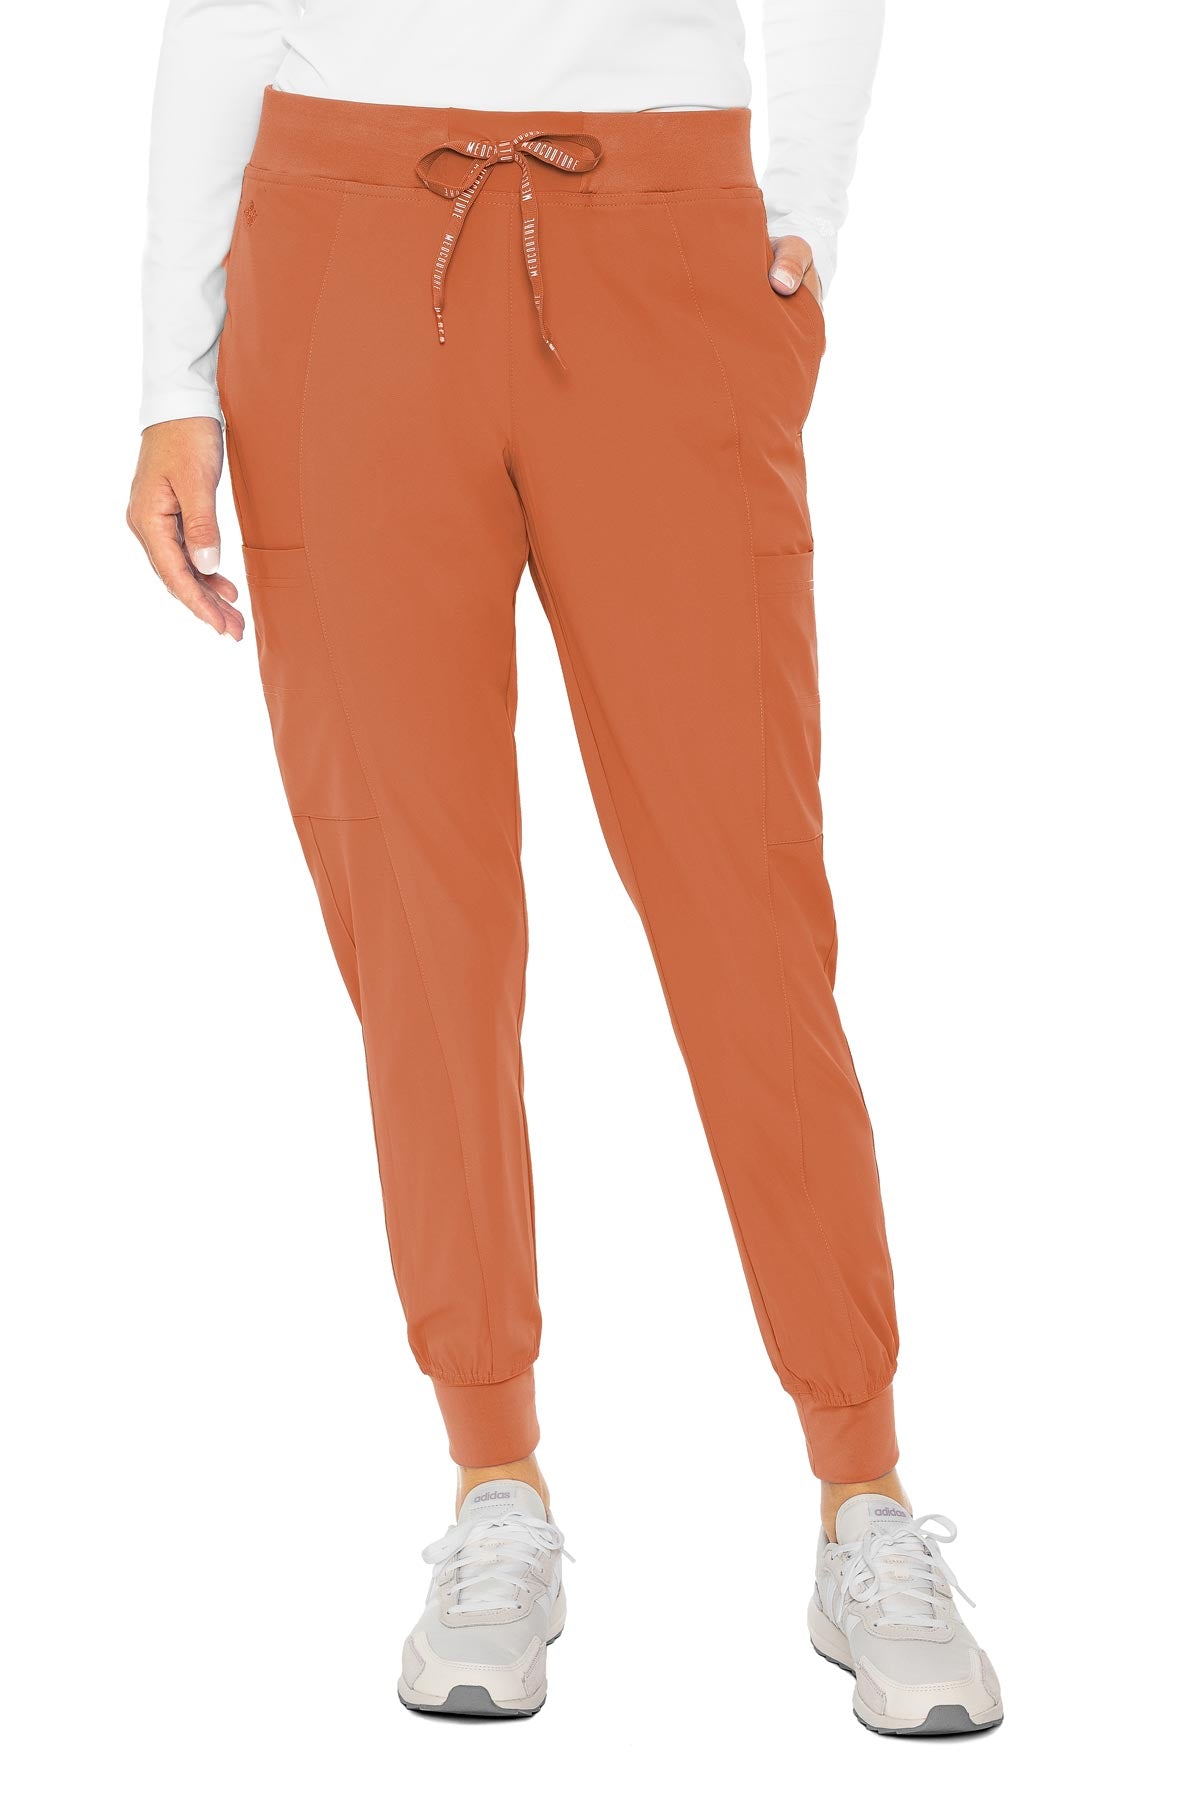 Med Couture Peaches Seamed Jogger Tall Length (XS-XL) – Berani